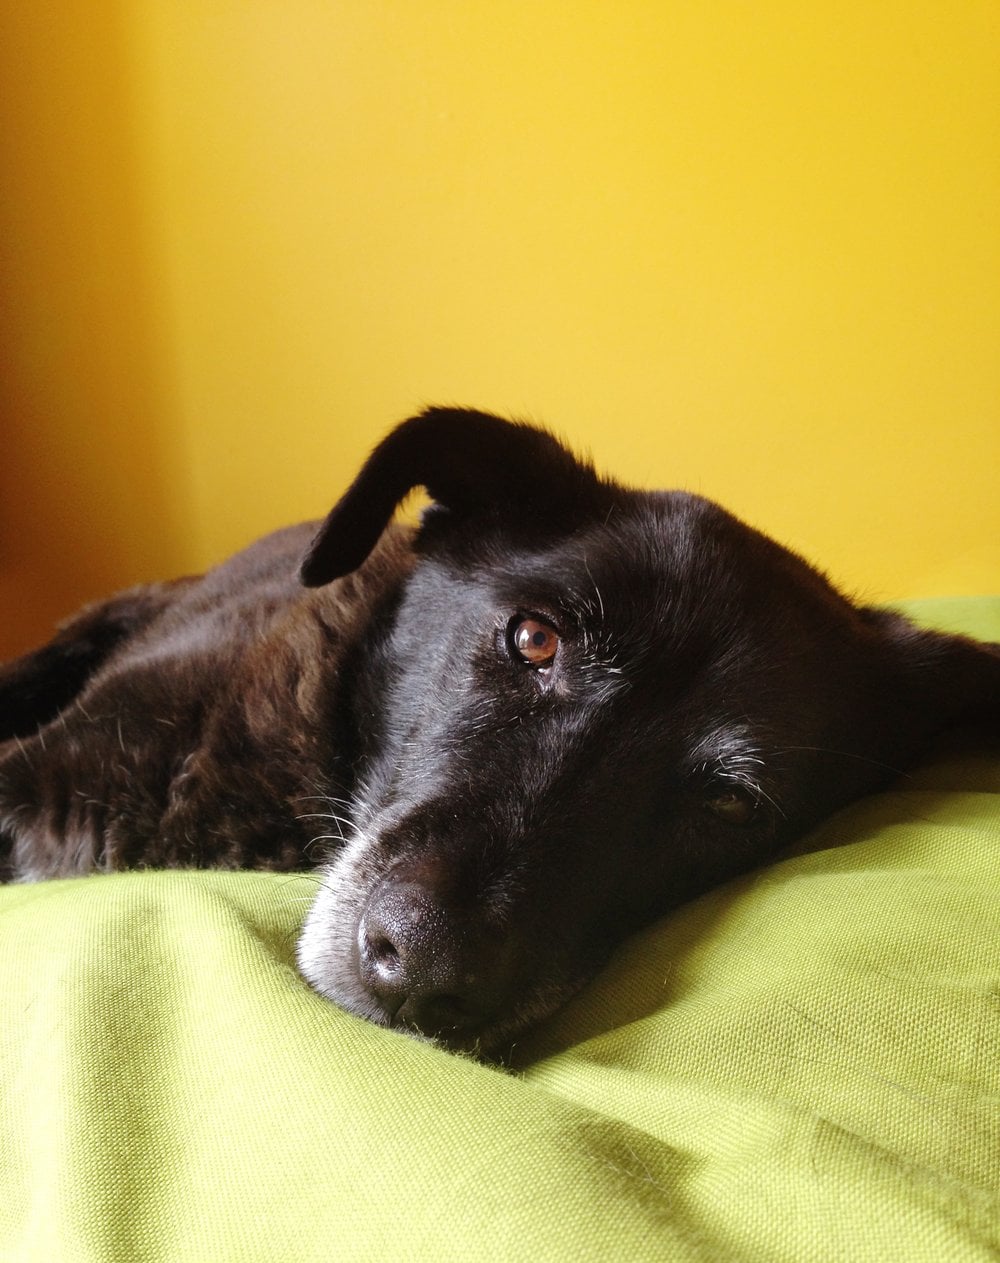 Image of Gypsy a large black dog relaxing on a green blanket